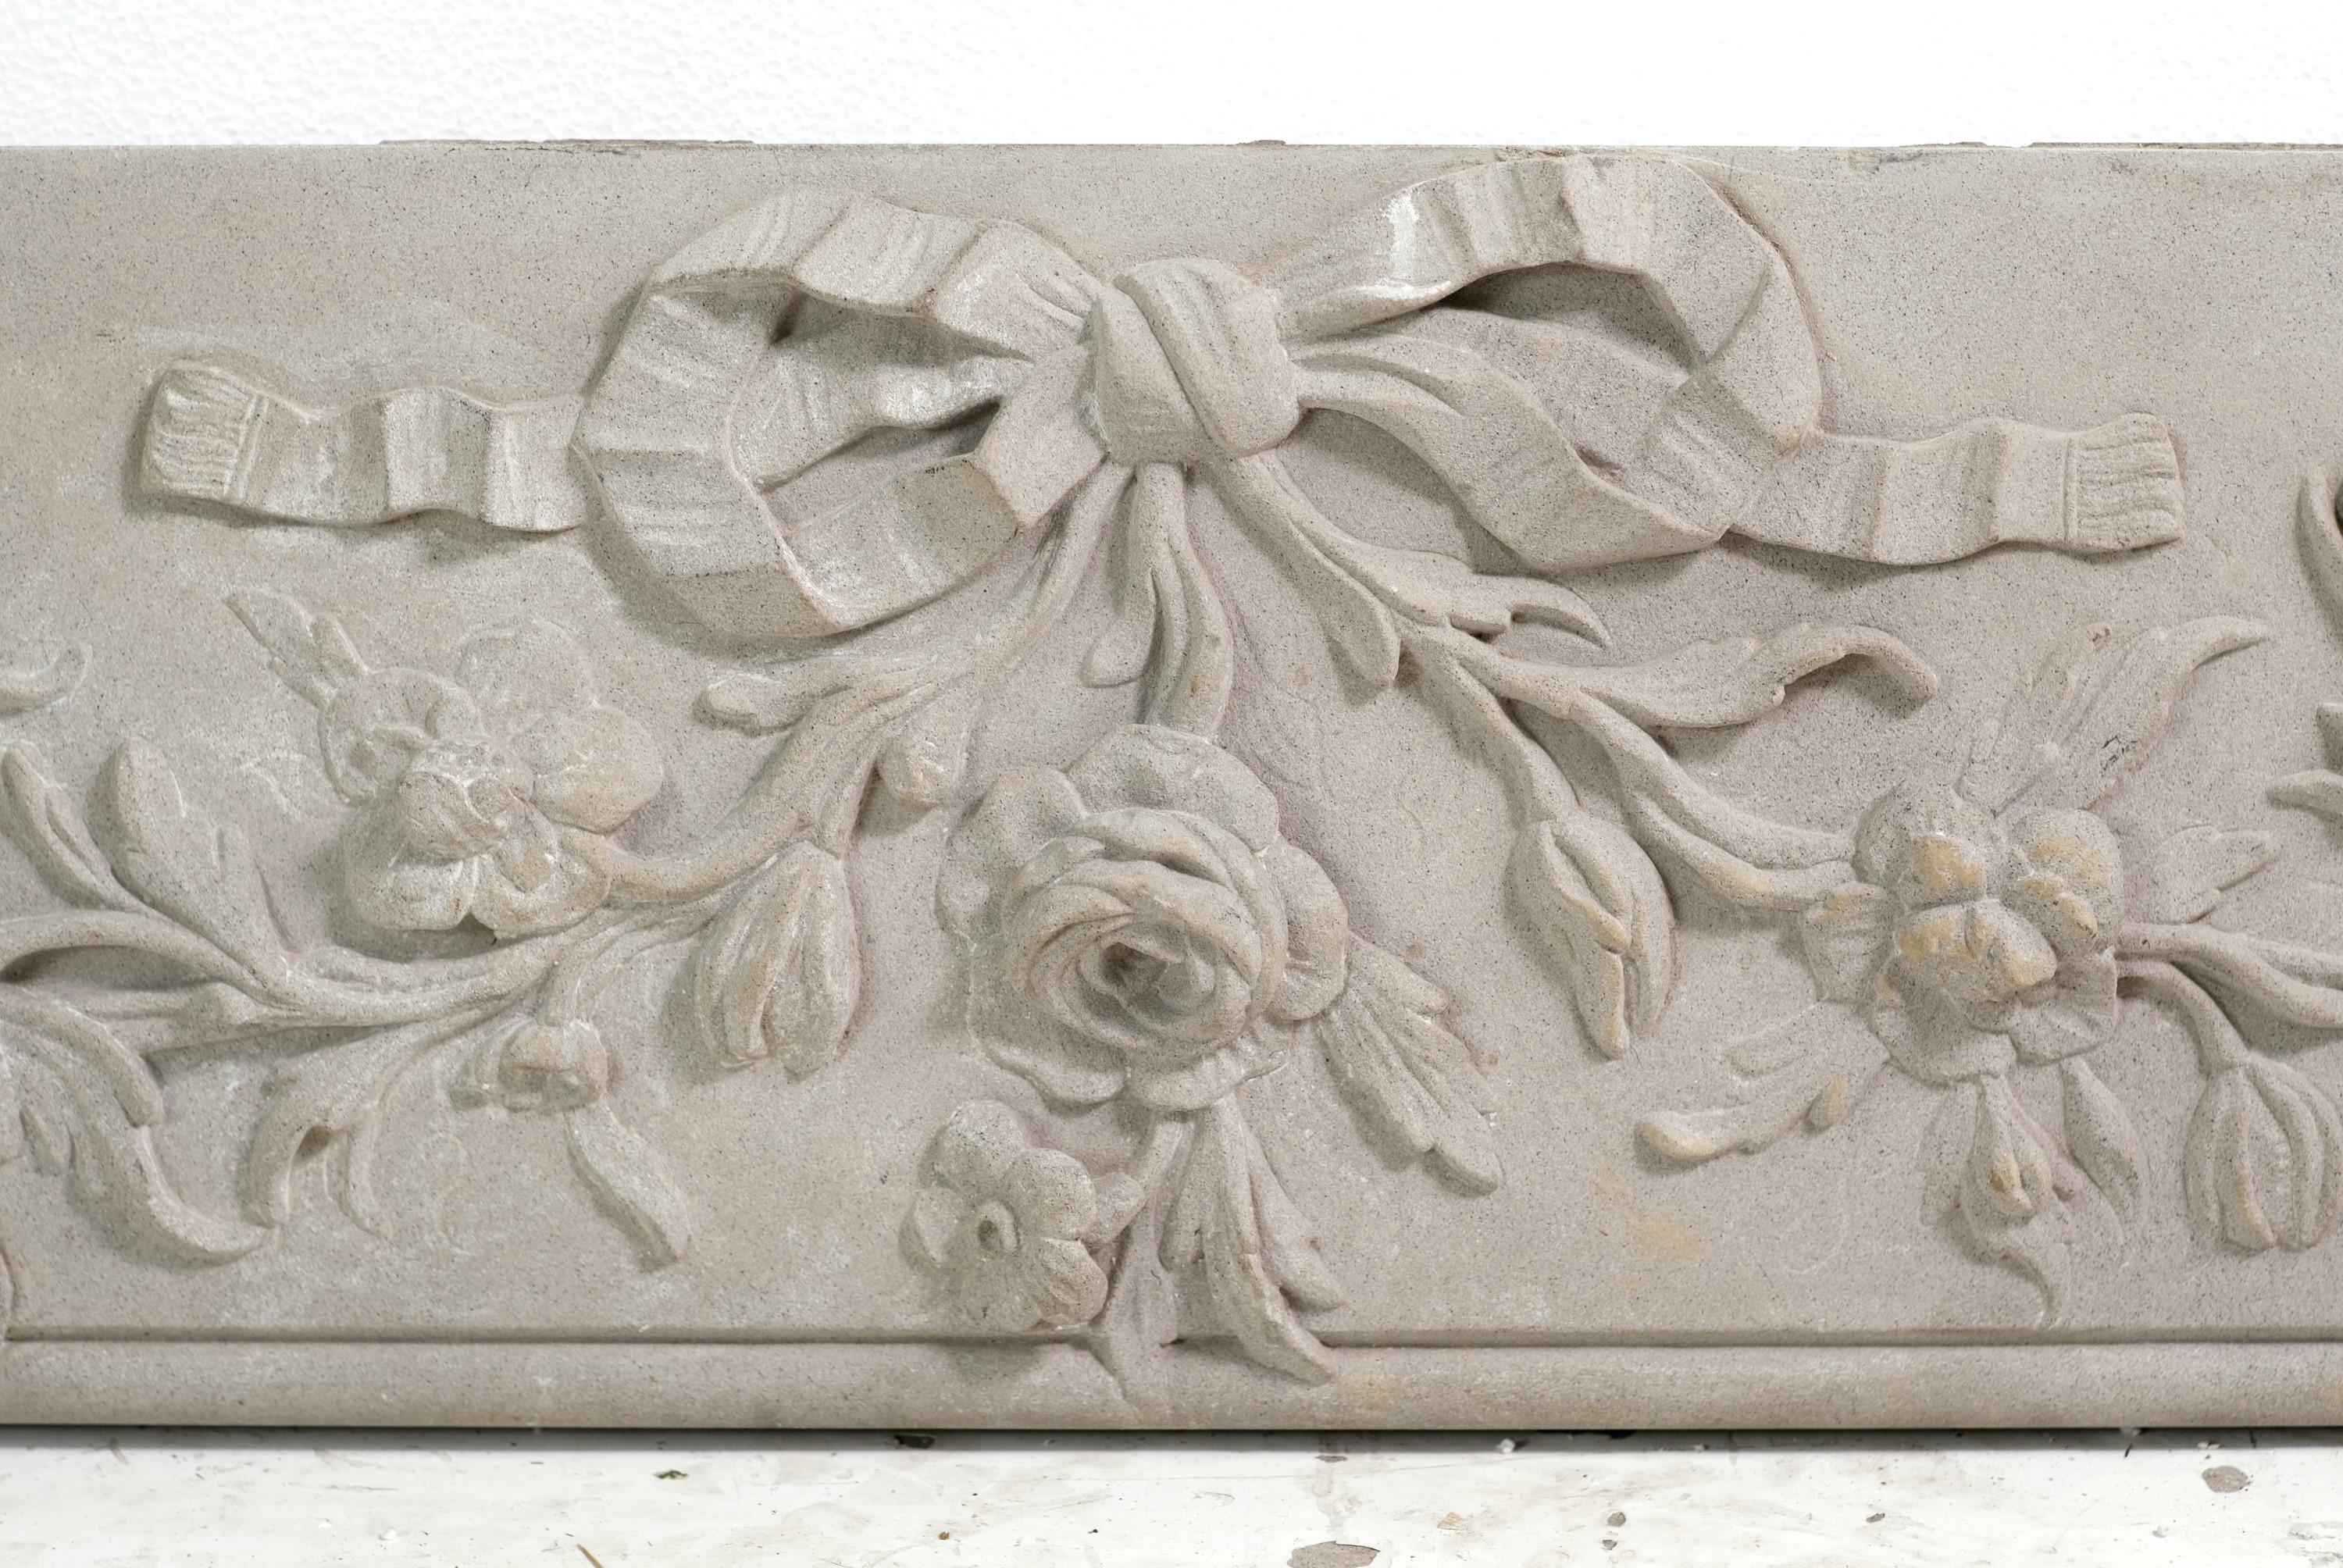 Early 20th century building façade piece. Hand carved from solid stone. Ornate details include ribbon swags, flowers, small creatures such as a dragonfly, caterpillar, and snails. Original building paint. Please note, this item is located in our